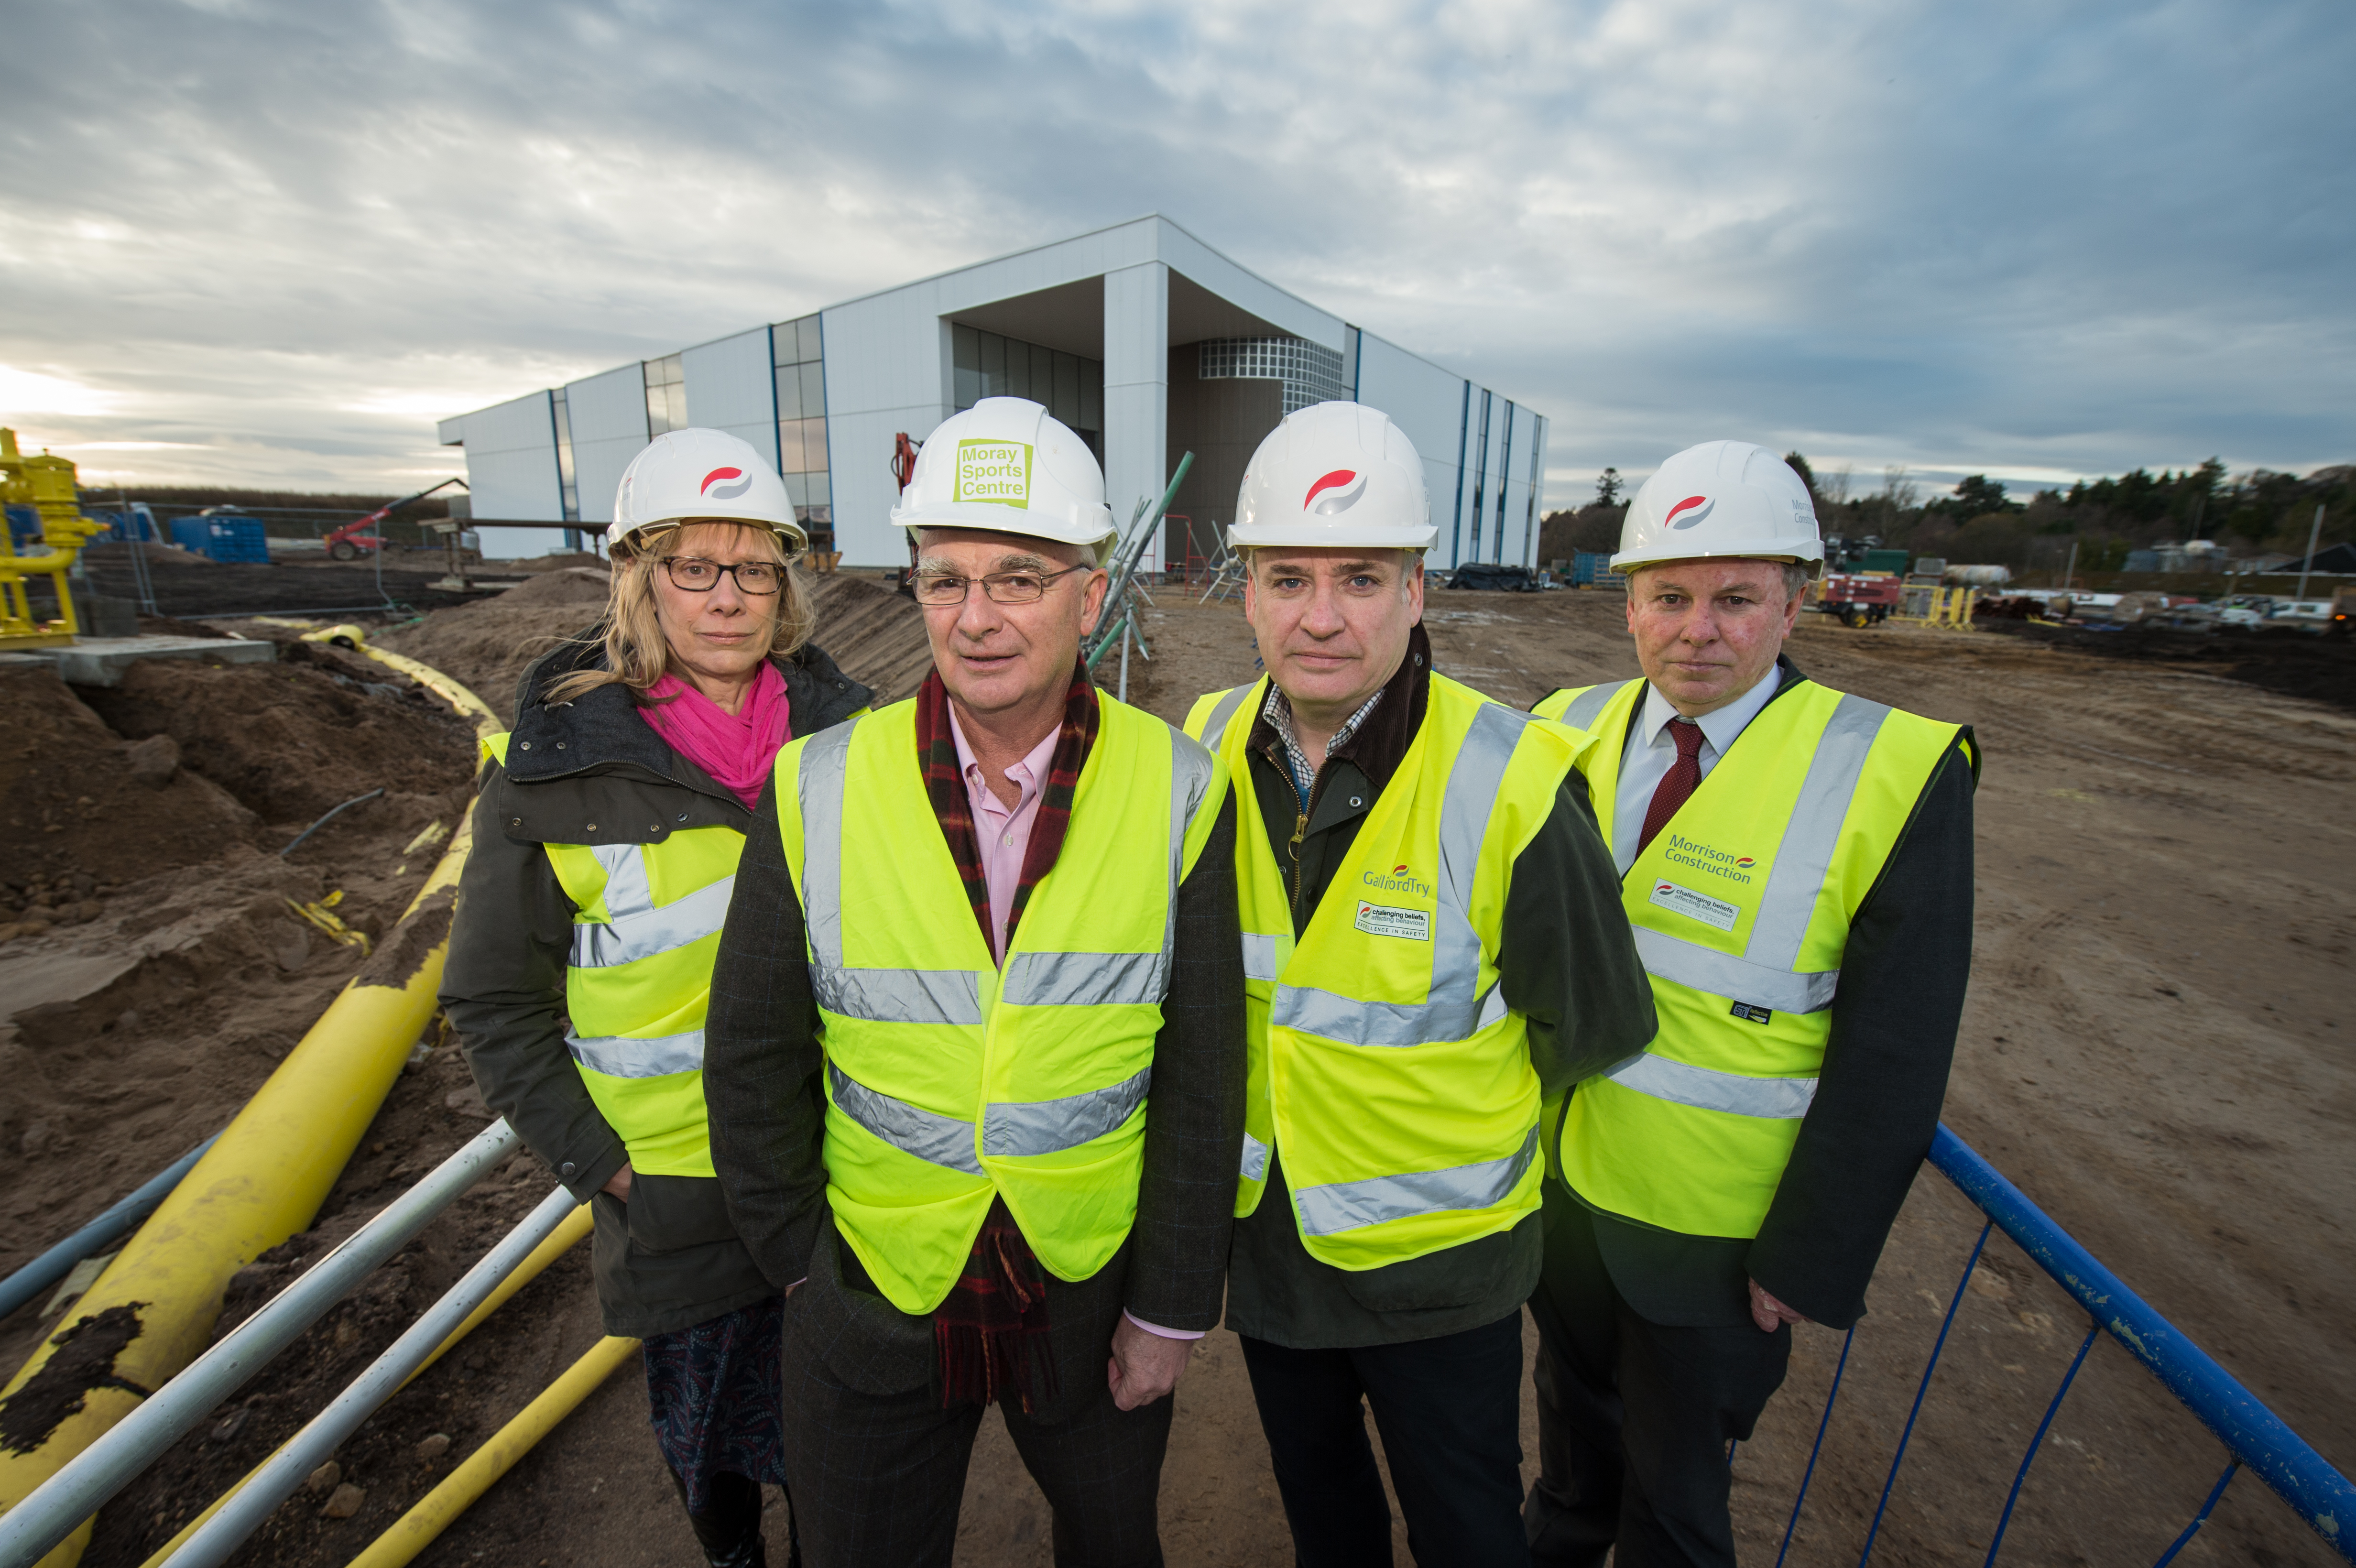 Jane Innes, trustee of Moray Sports Foundation, Sandy Adam, convener of Moray Sports Foundation, Moray MSP Richard Lochhead and Carl Gavine, operations manager of Moray Sports Centre, outside the under construction sports complex in Elgin.